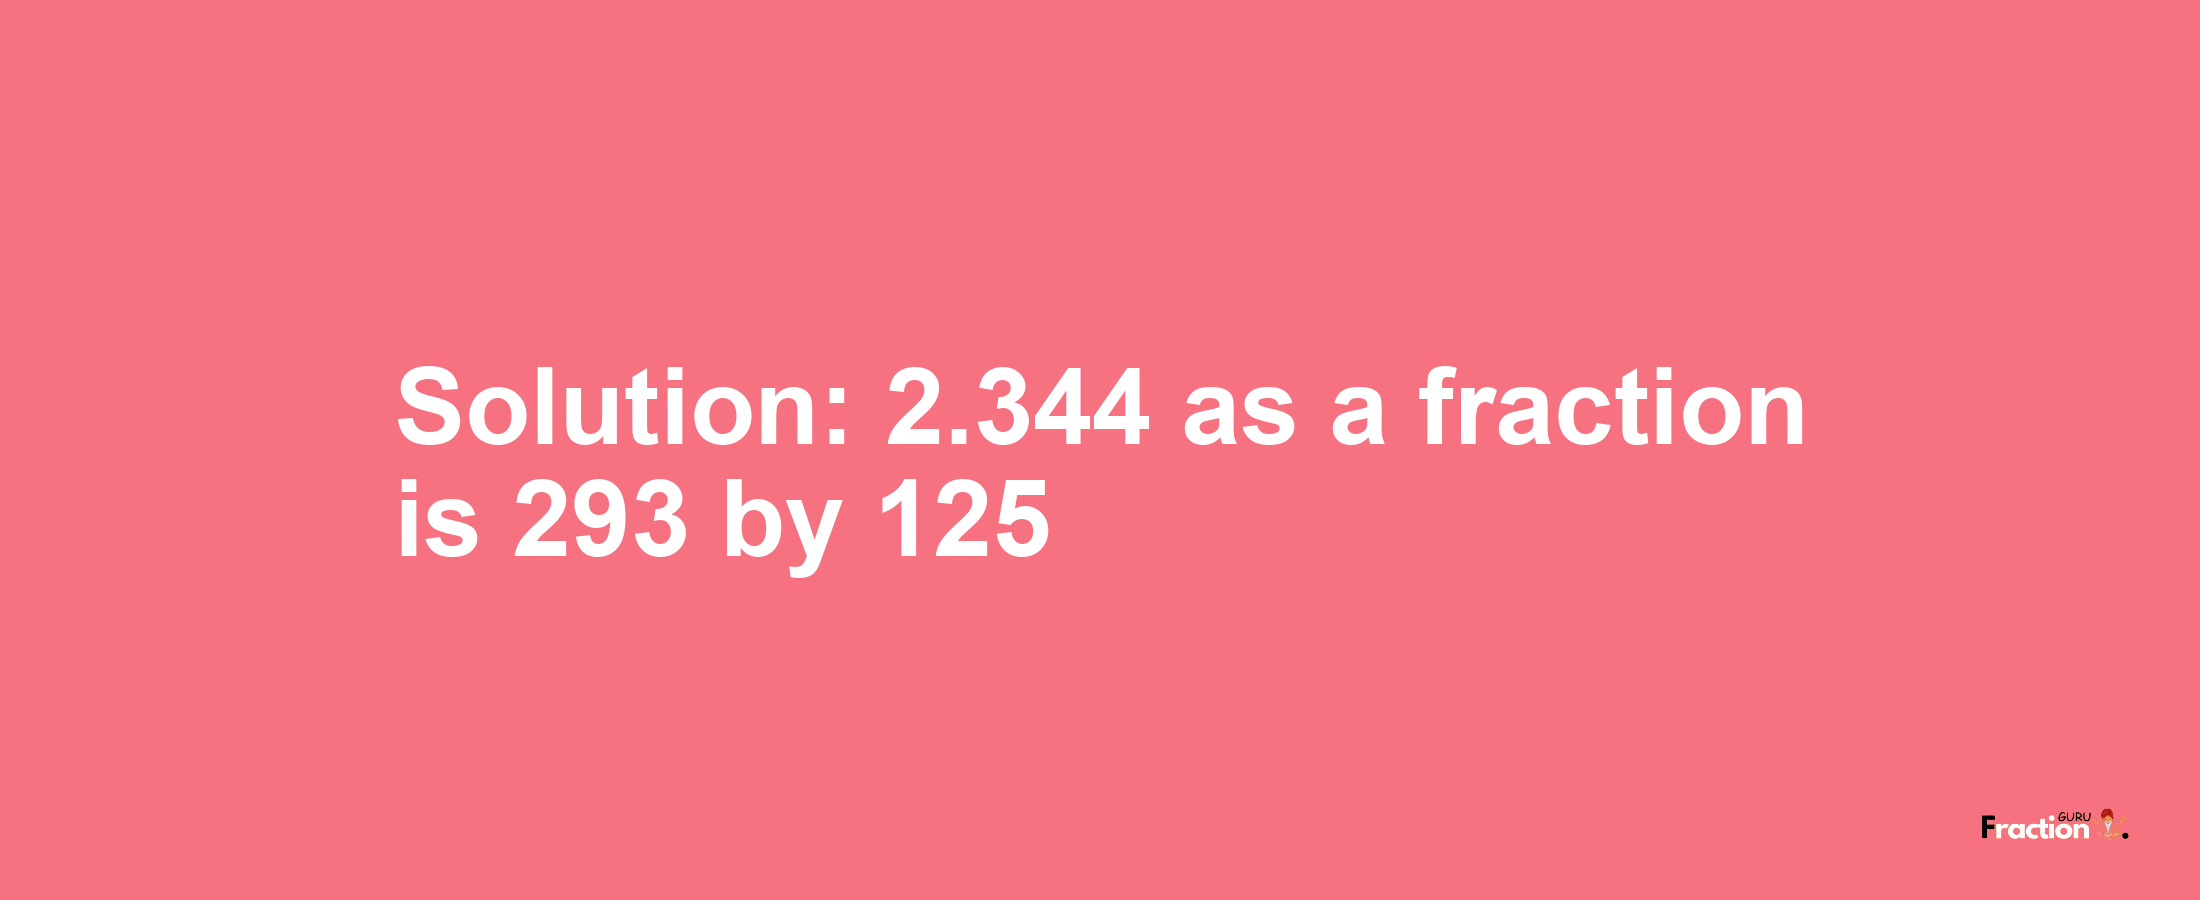 Solution:2.344 as a fraction is 293/125